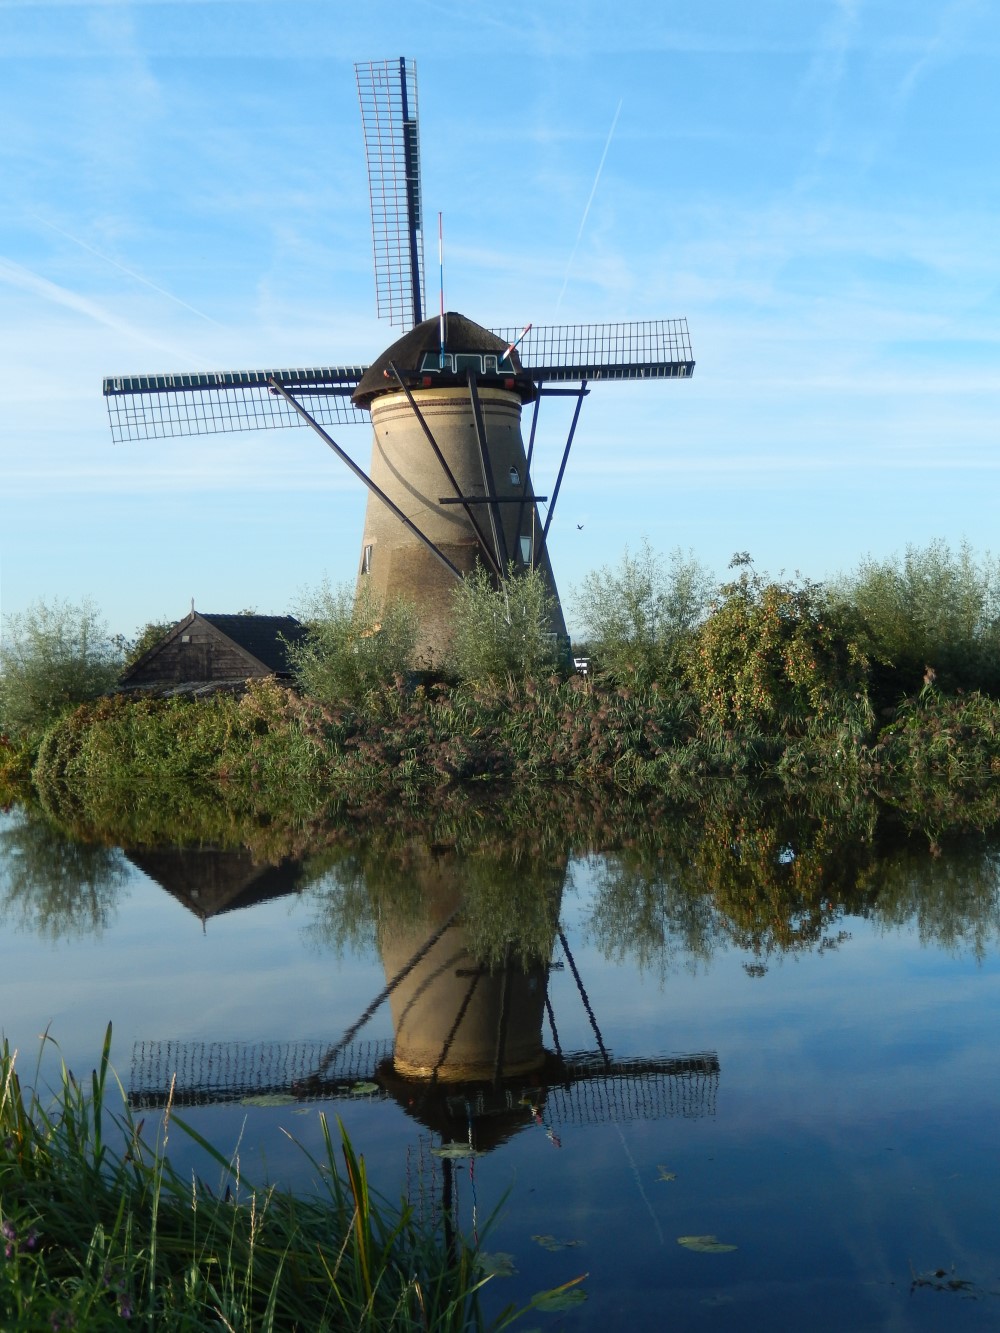 Windmill in the Netherlands